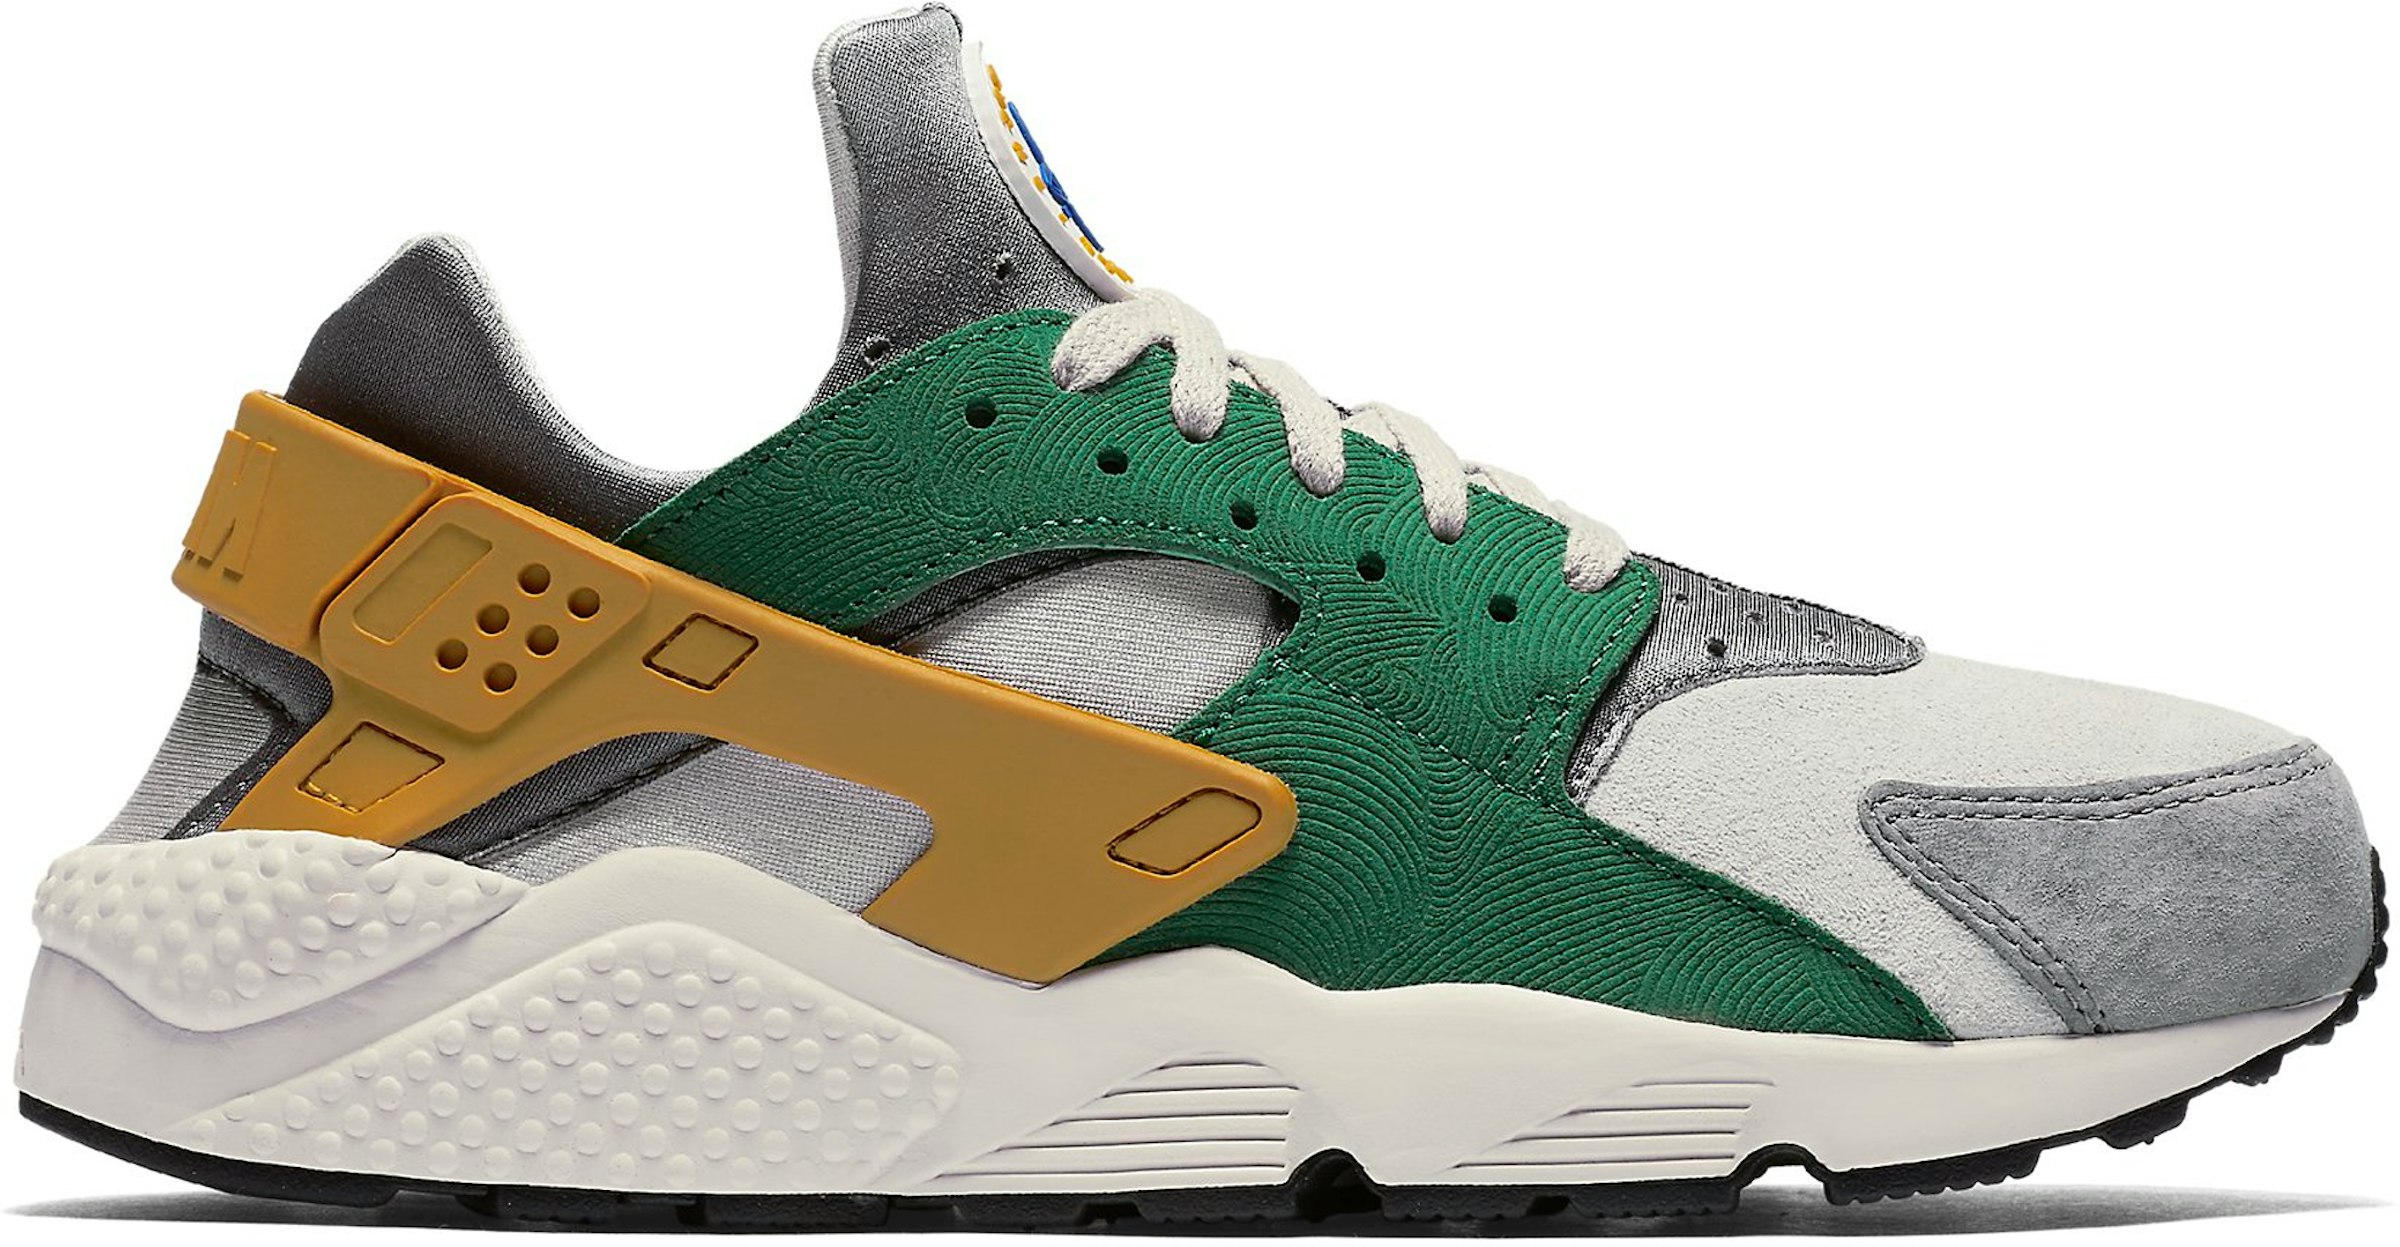 Muchos antecedentes Asentar Buy Nike Huarache Shoes & New Sneakers - StockX